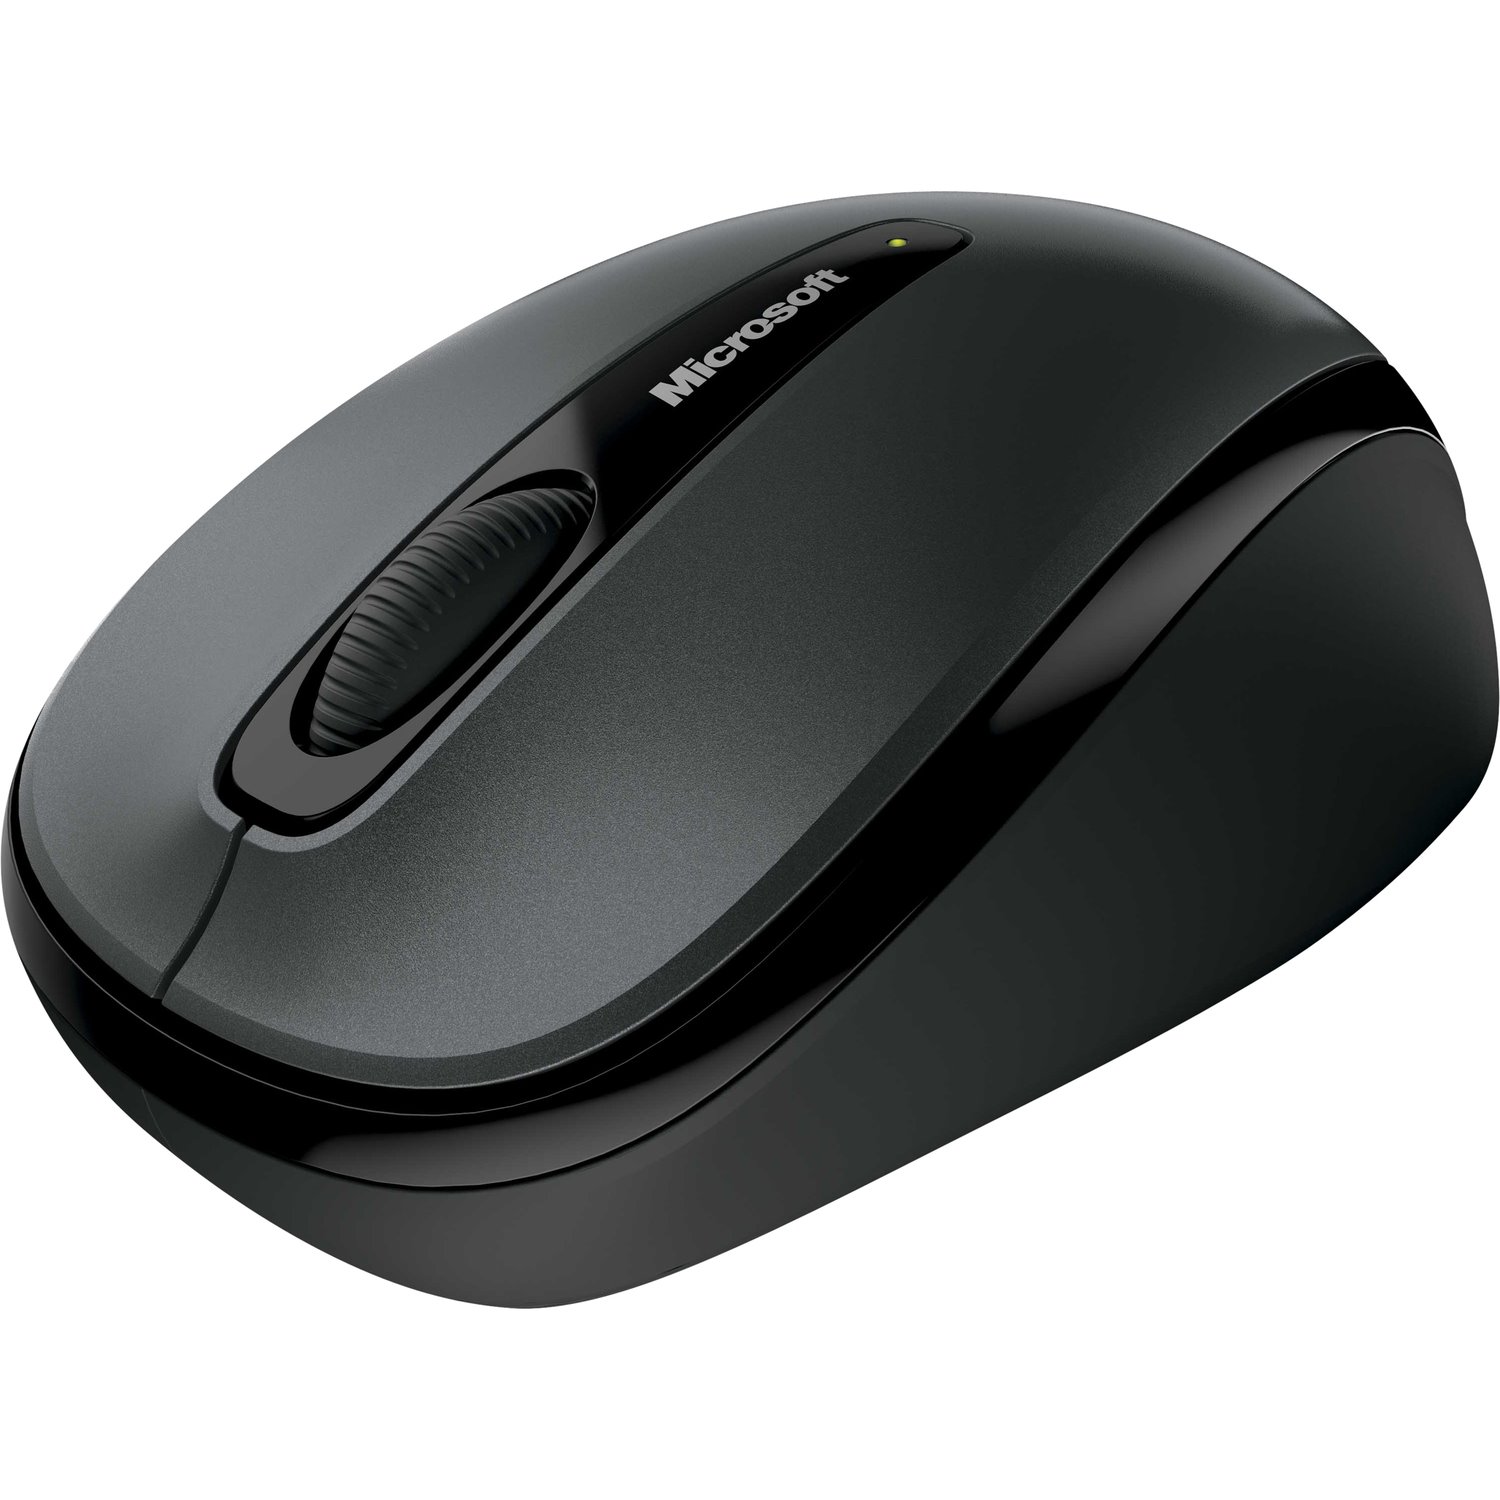 Microsoft 3500 Mouse - Radio Frequency - USB 2.0 - BlueTrack - 3 Button(s) - Black